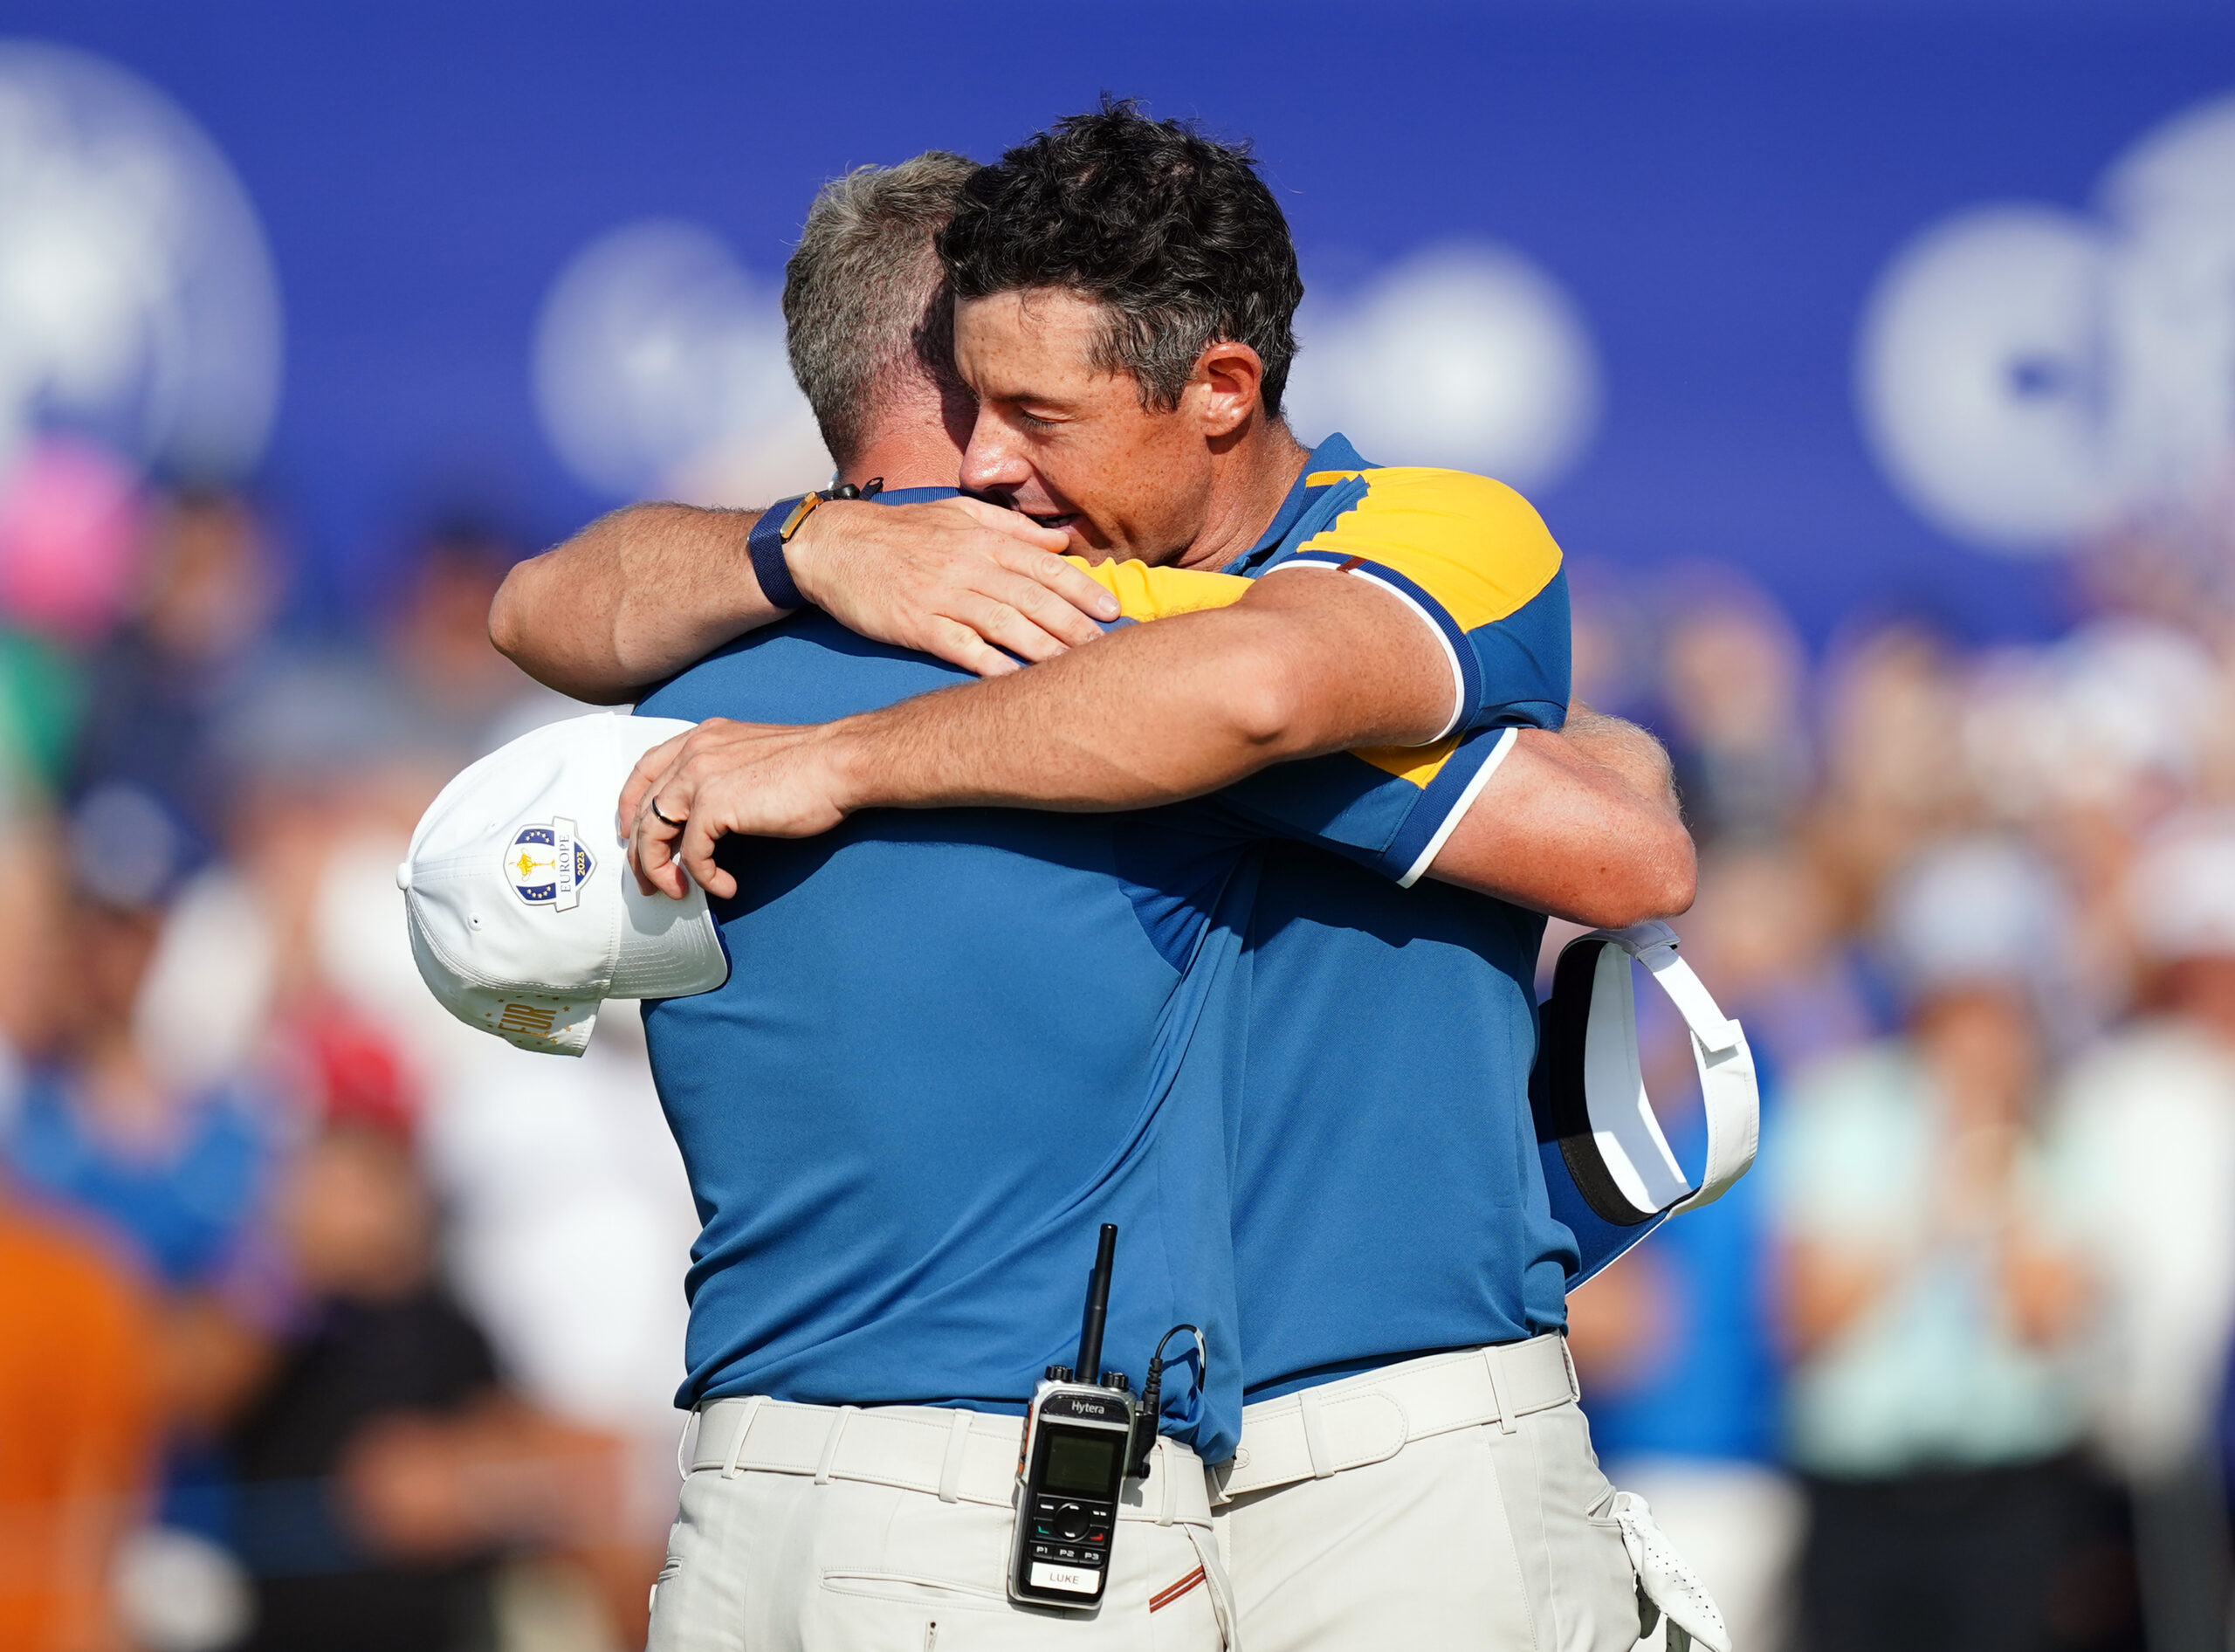 Team Europe’s Rory McIlroy with Captain Luke Donald following his singles match